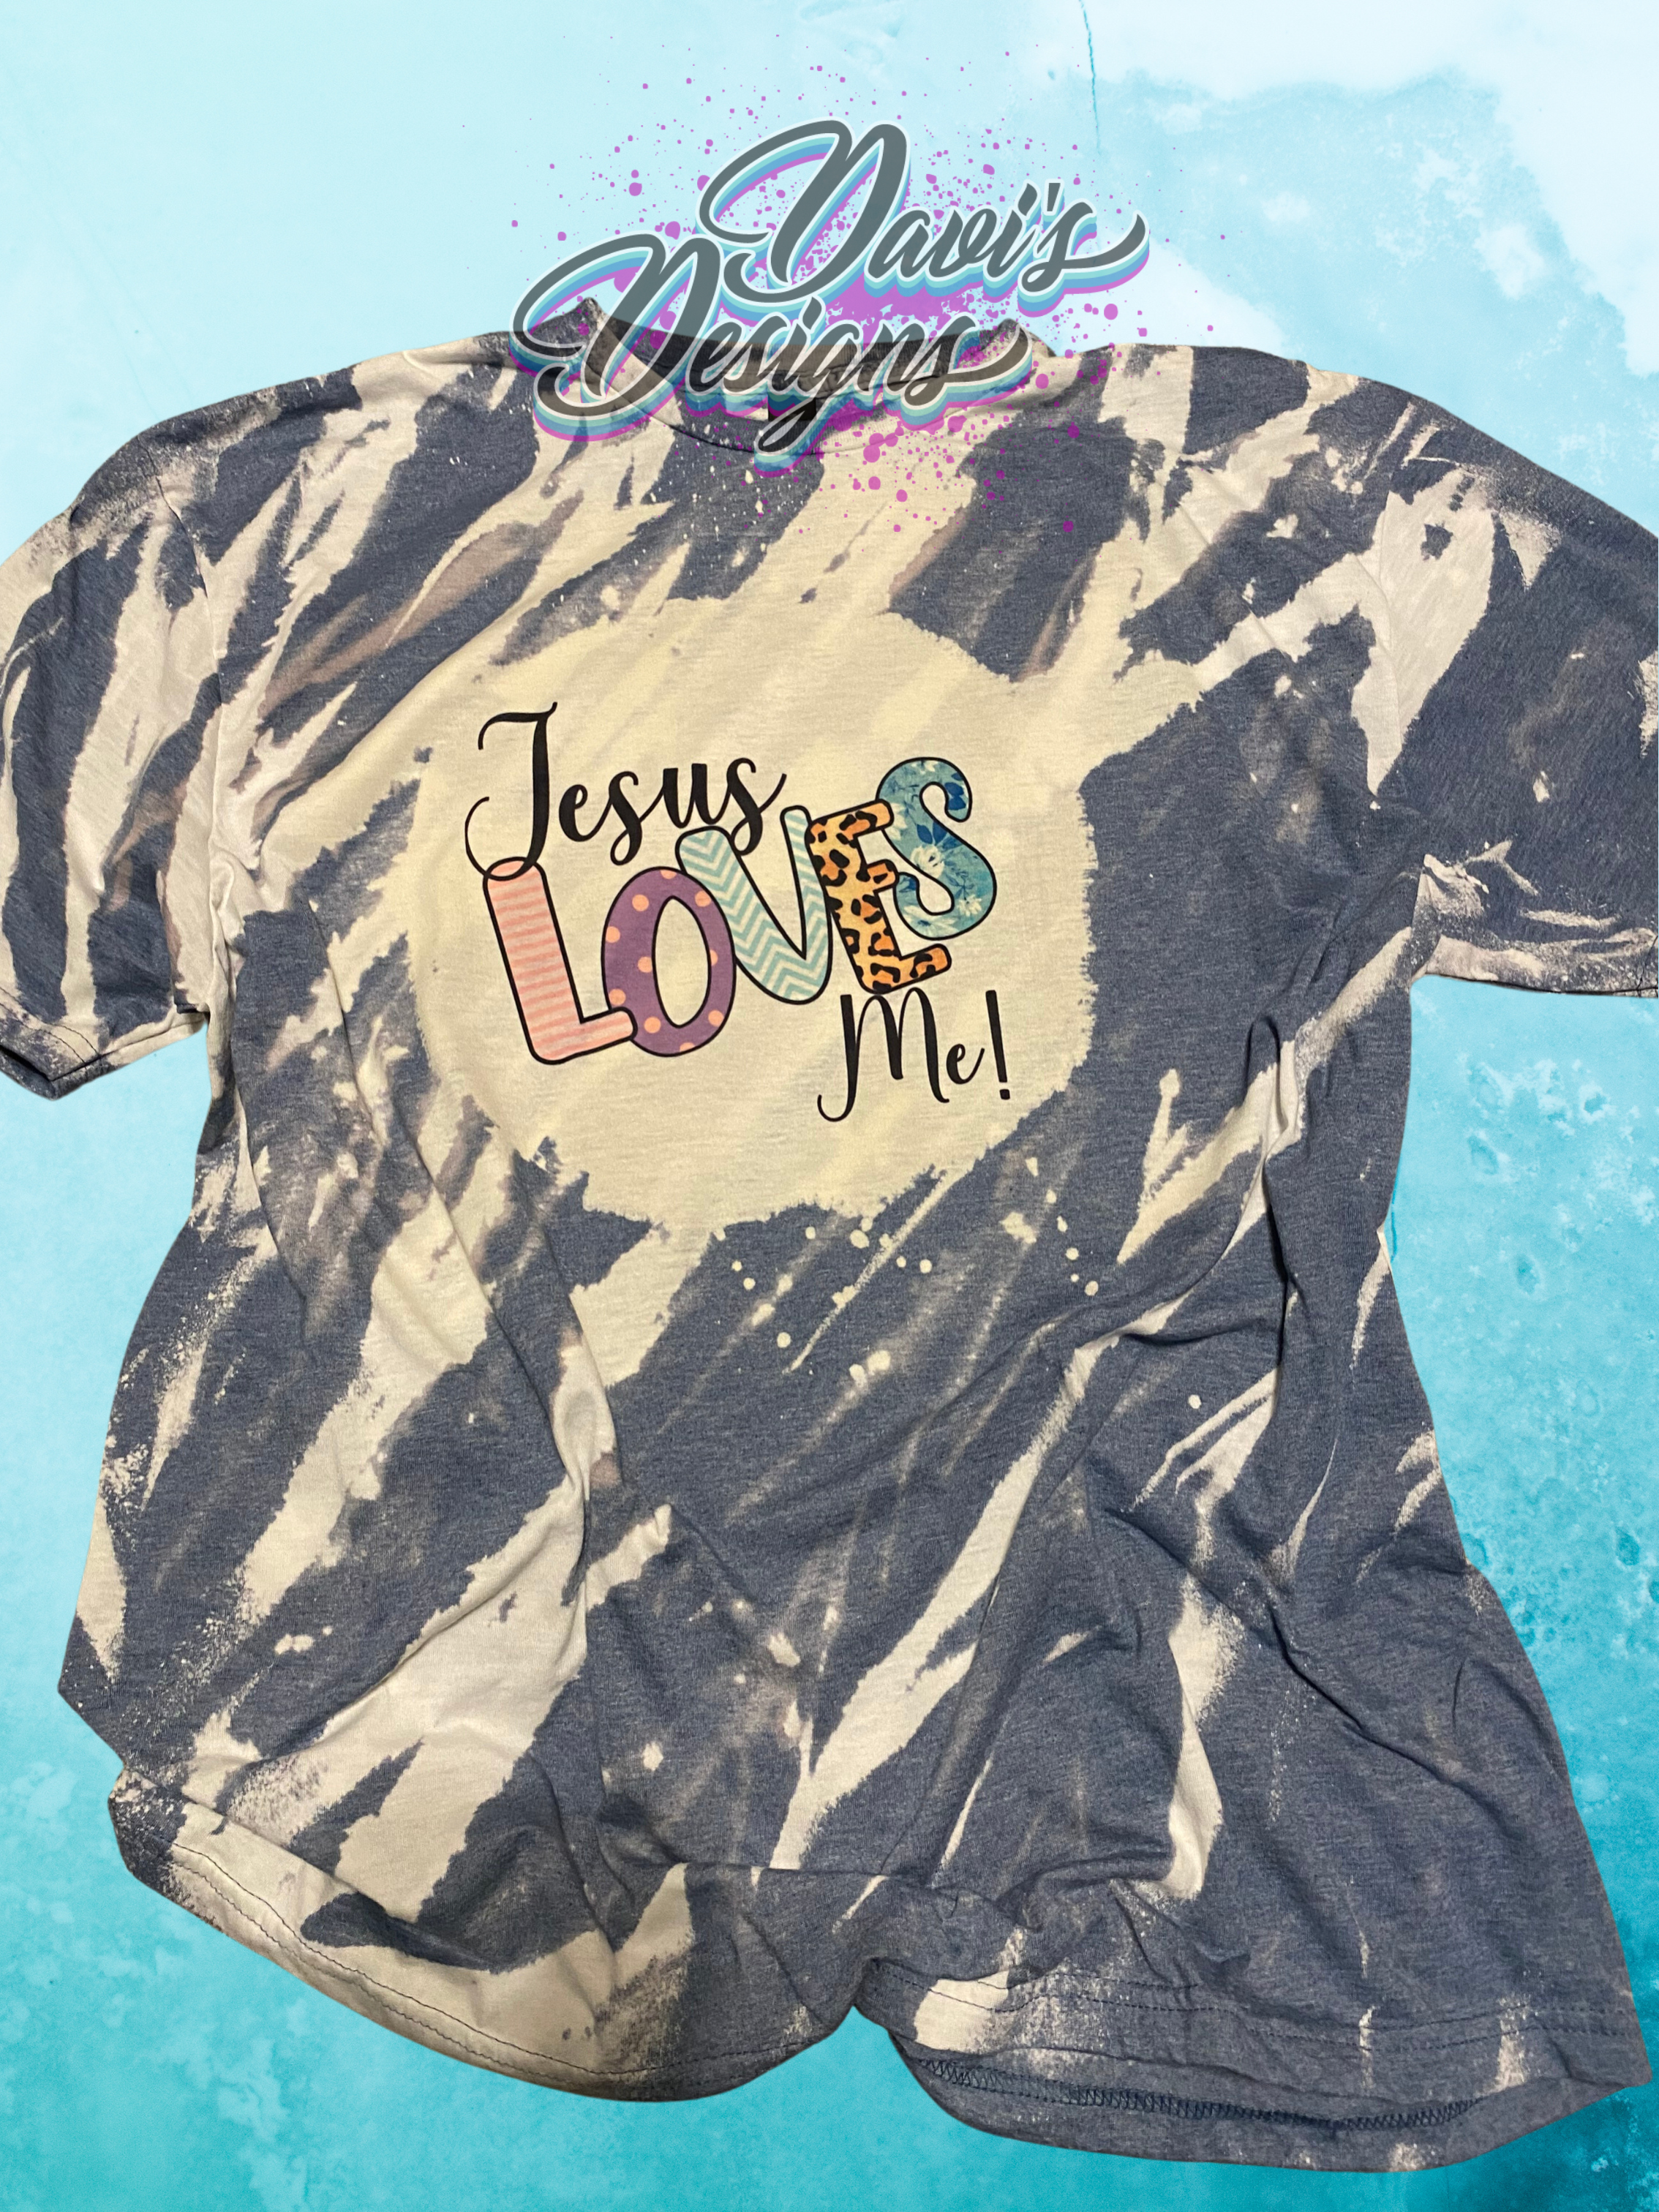 Heather Indigo bleach patterned tee with saying of Jesus Loves Me.